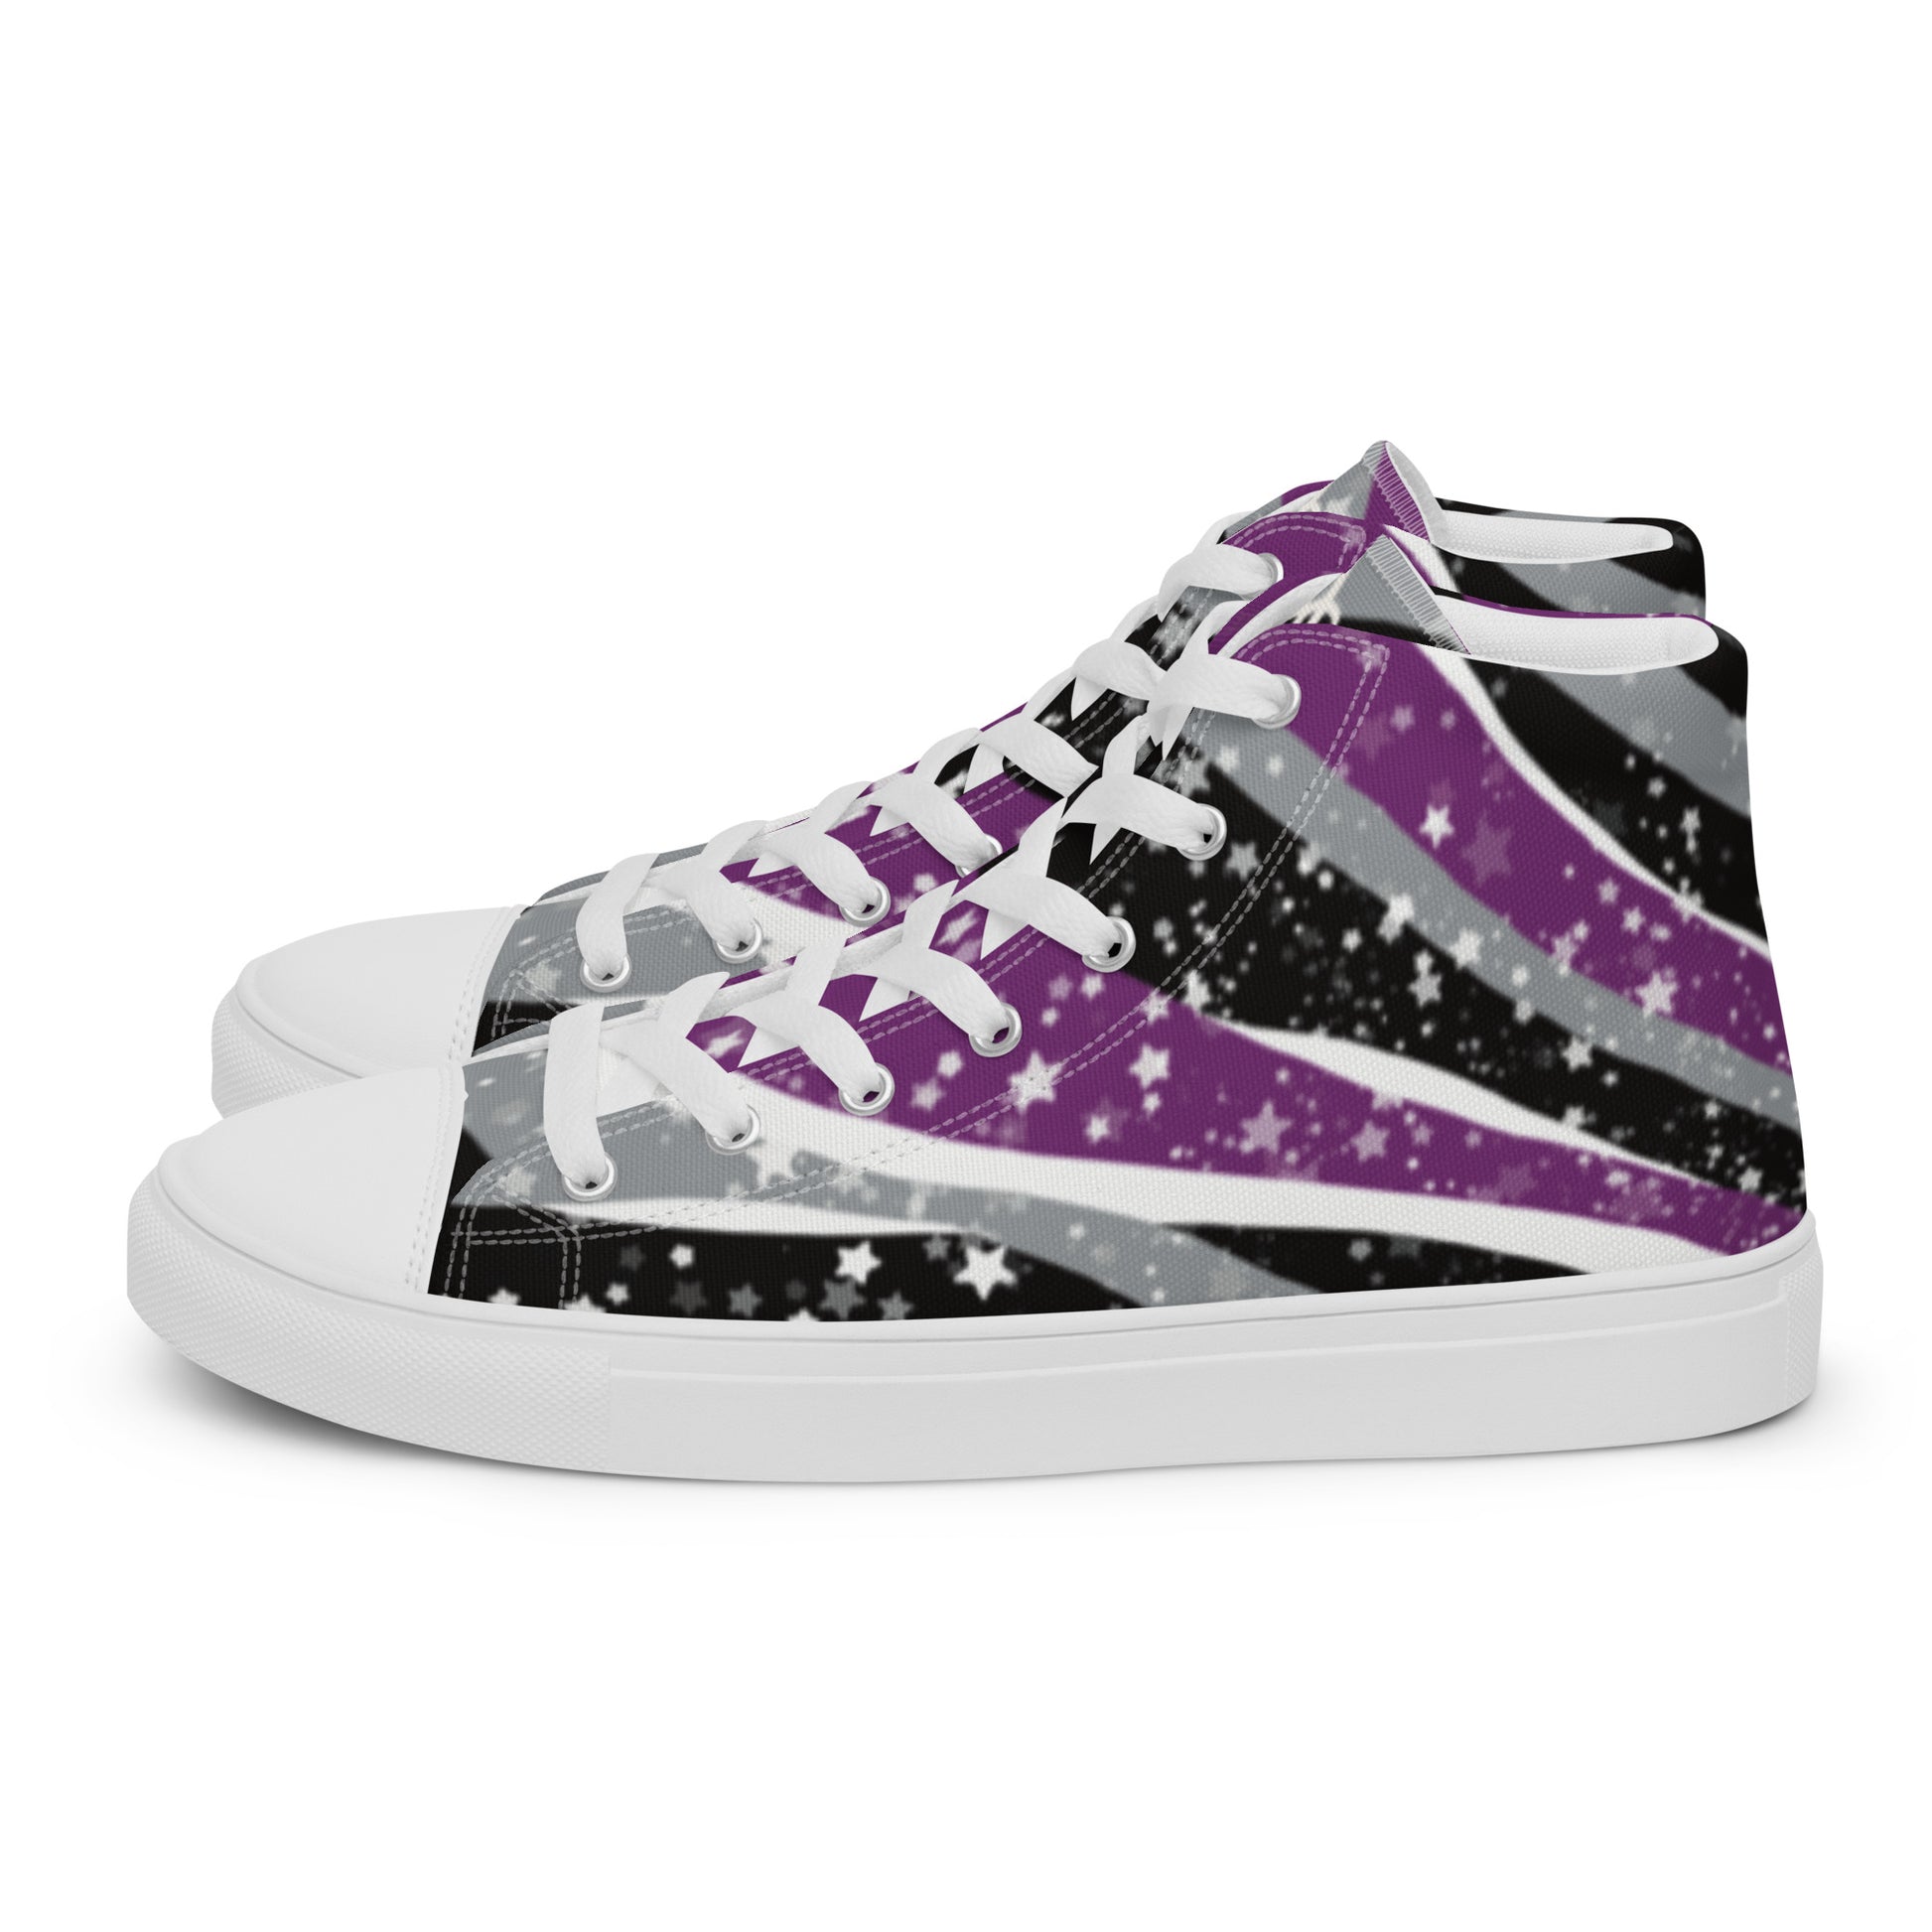 A pair of Starry Asexual shoes with ribbons of purple, grey, black, and white seem to expand from the heel to the laces with an explosion of stars.